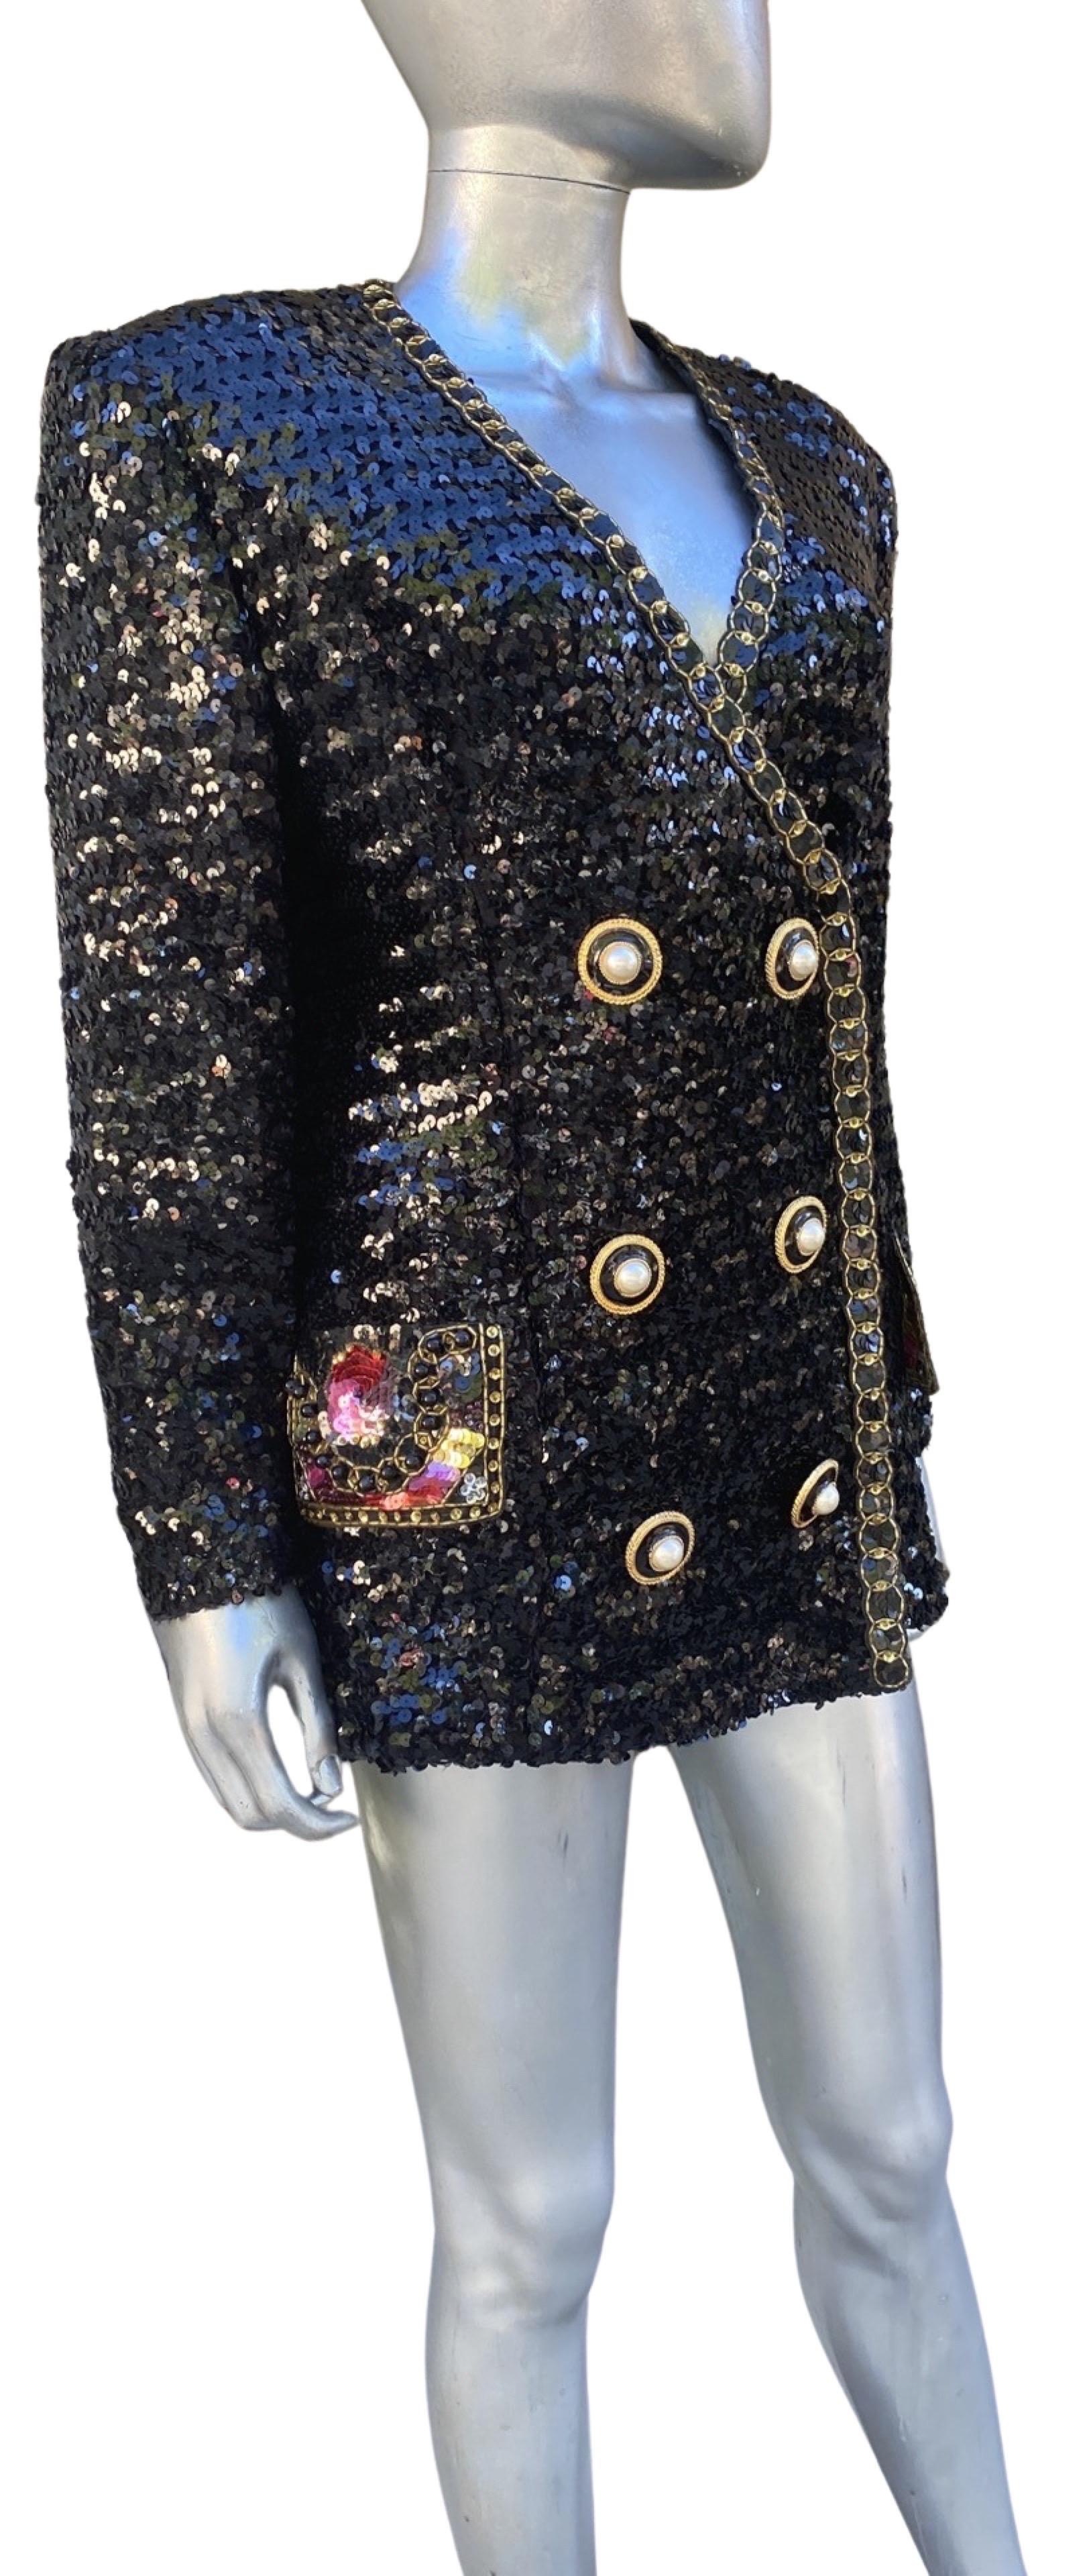 Lillie Rubin Vintage Sequin Jacket with Spectacular Trim/Buttons Size 12-14 For Sale 4